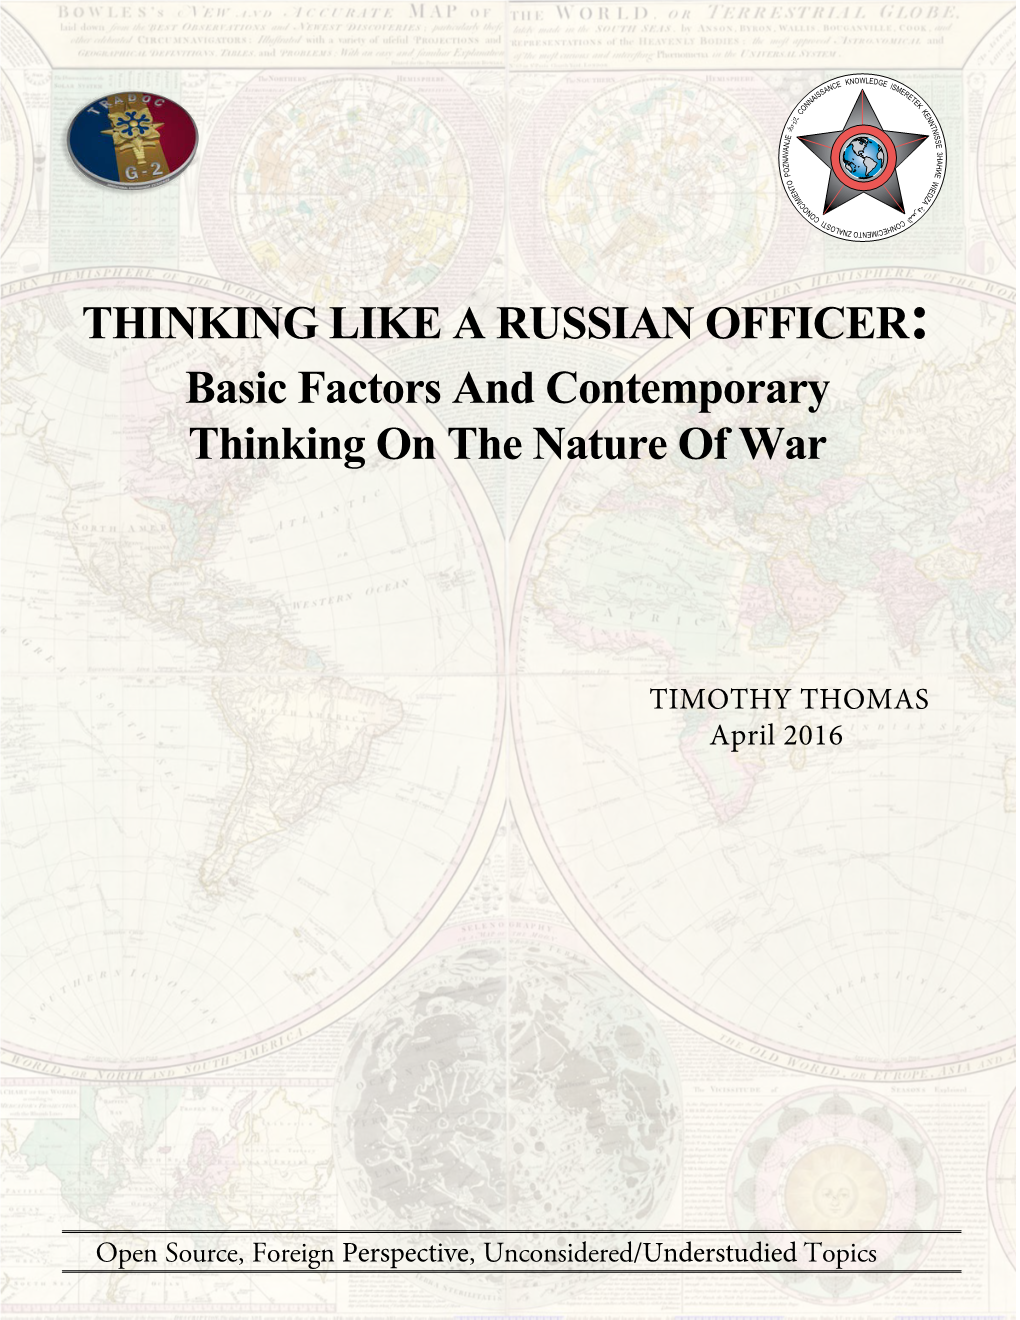 THINKING LIKE a RUSSIAN OFFICER: Basic Factors and Contemporary Thinking on the Nature of War